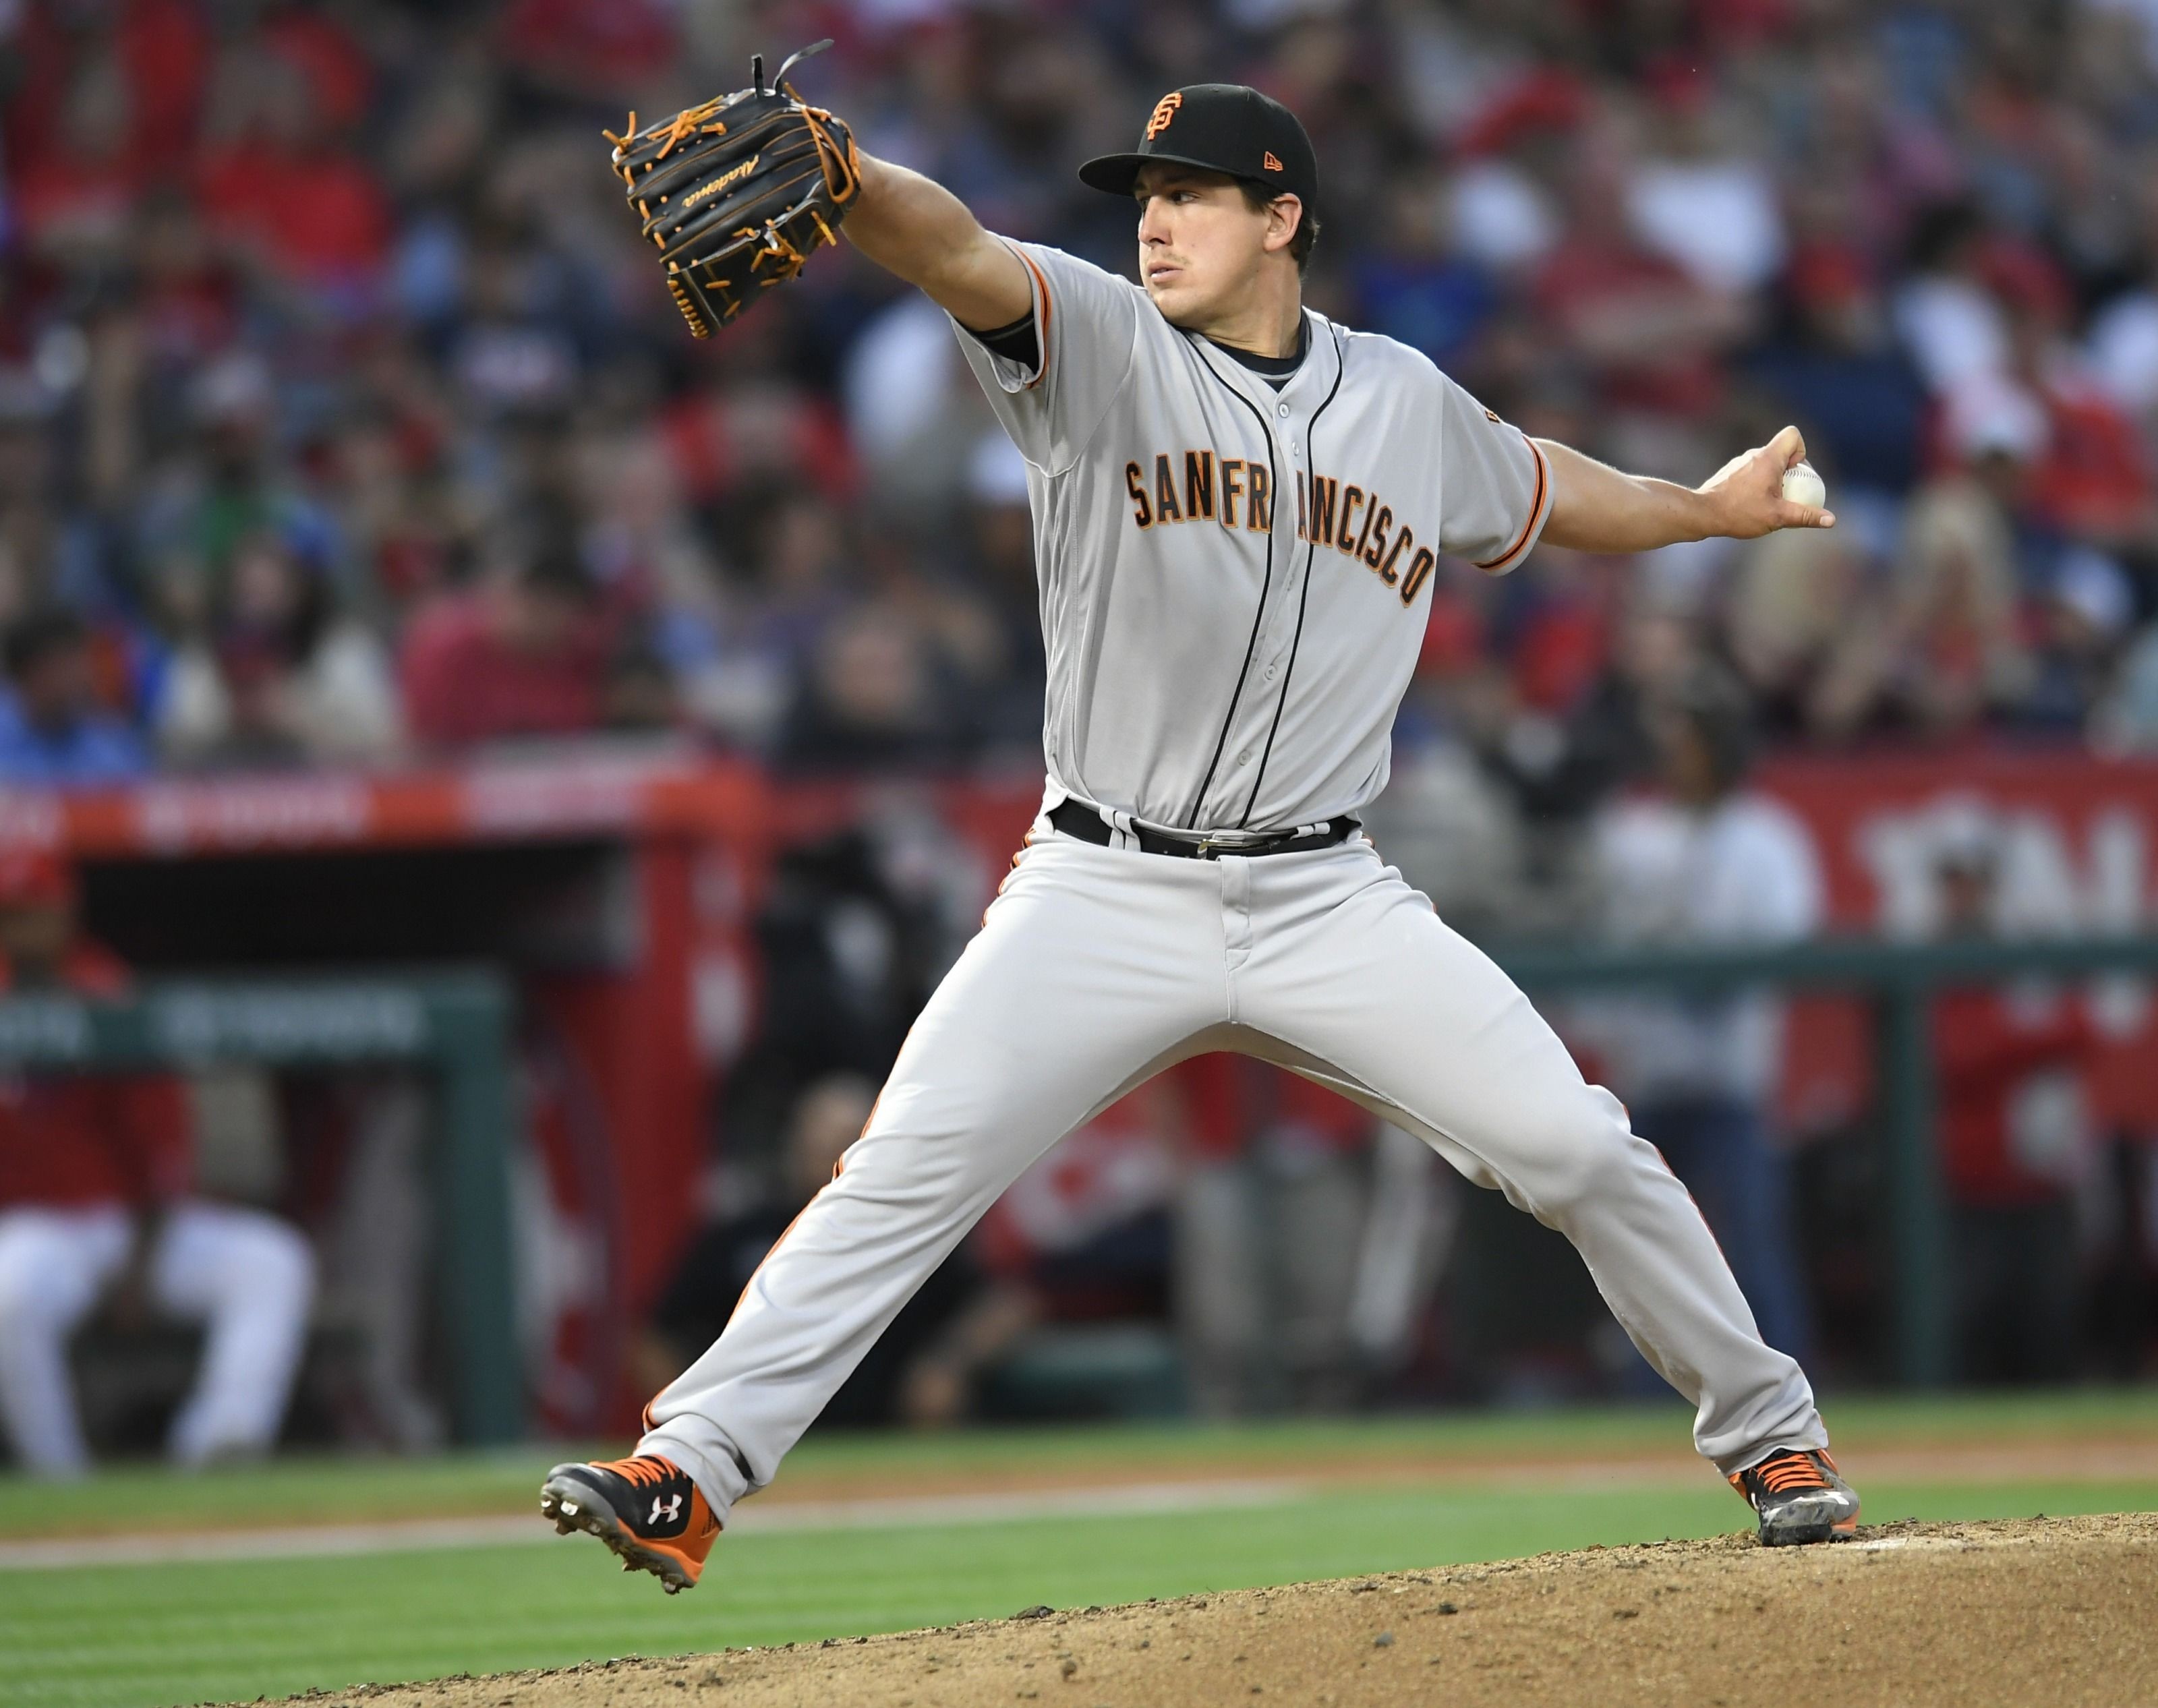 Derek Holland’s Future with the San Francisco Giants